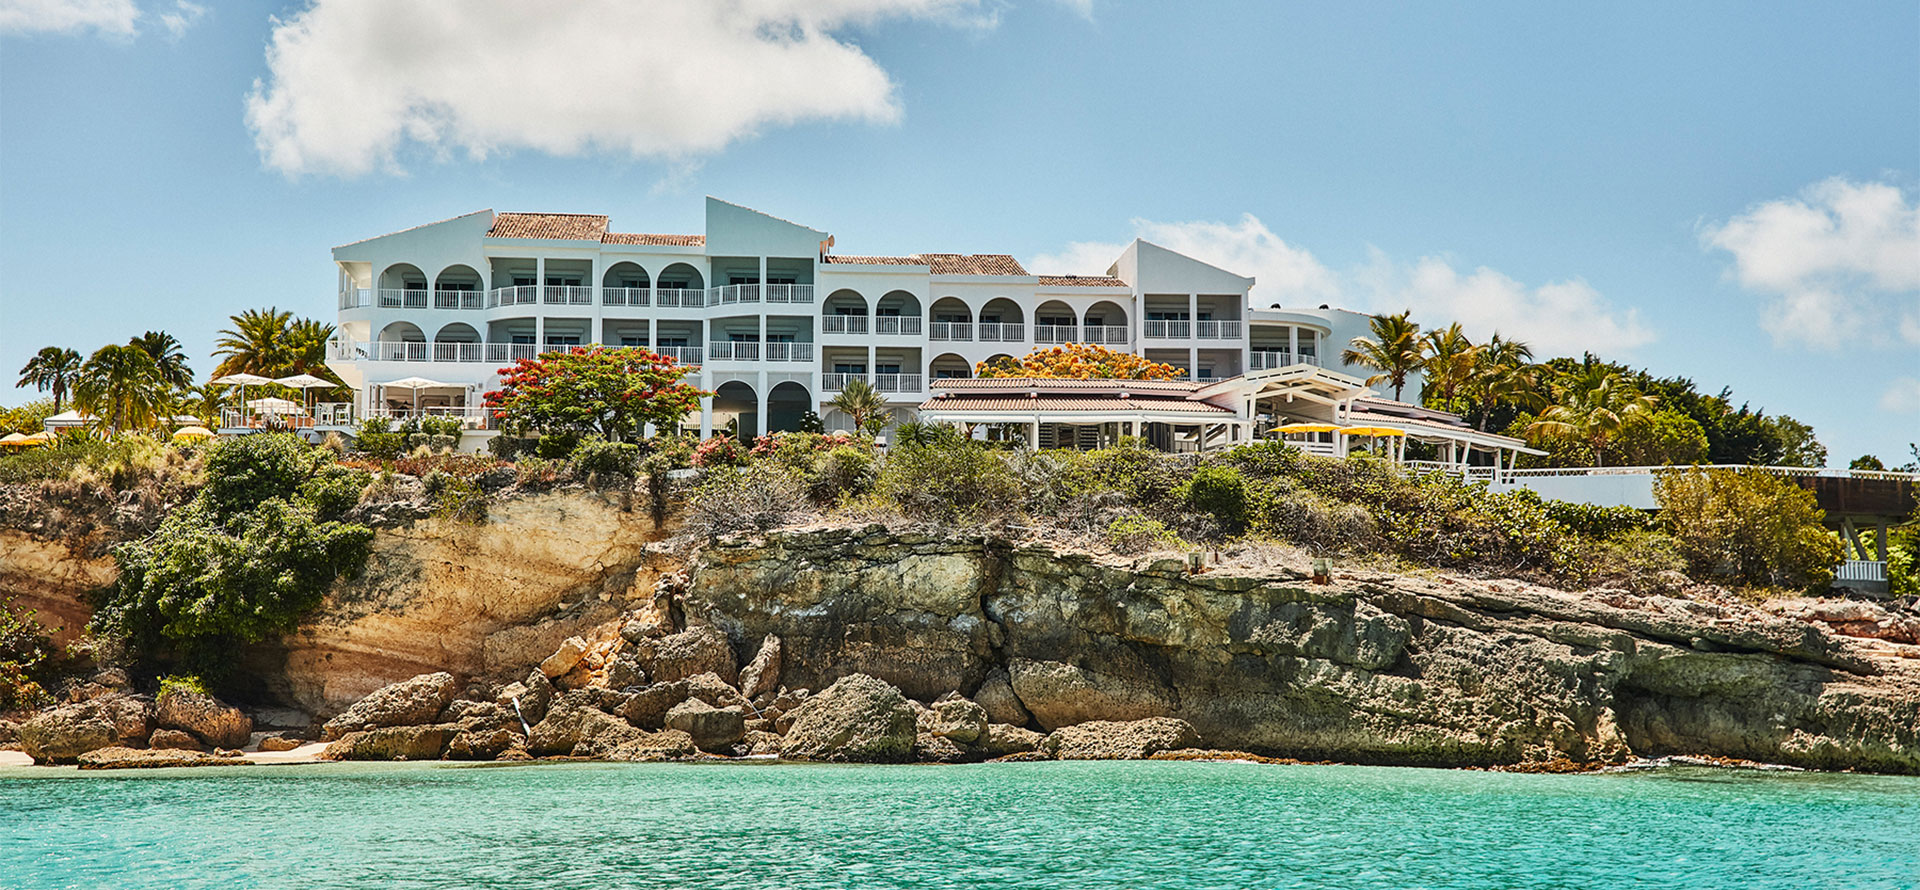 Resort on the rock in Anguilla.